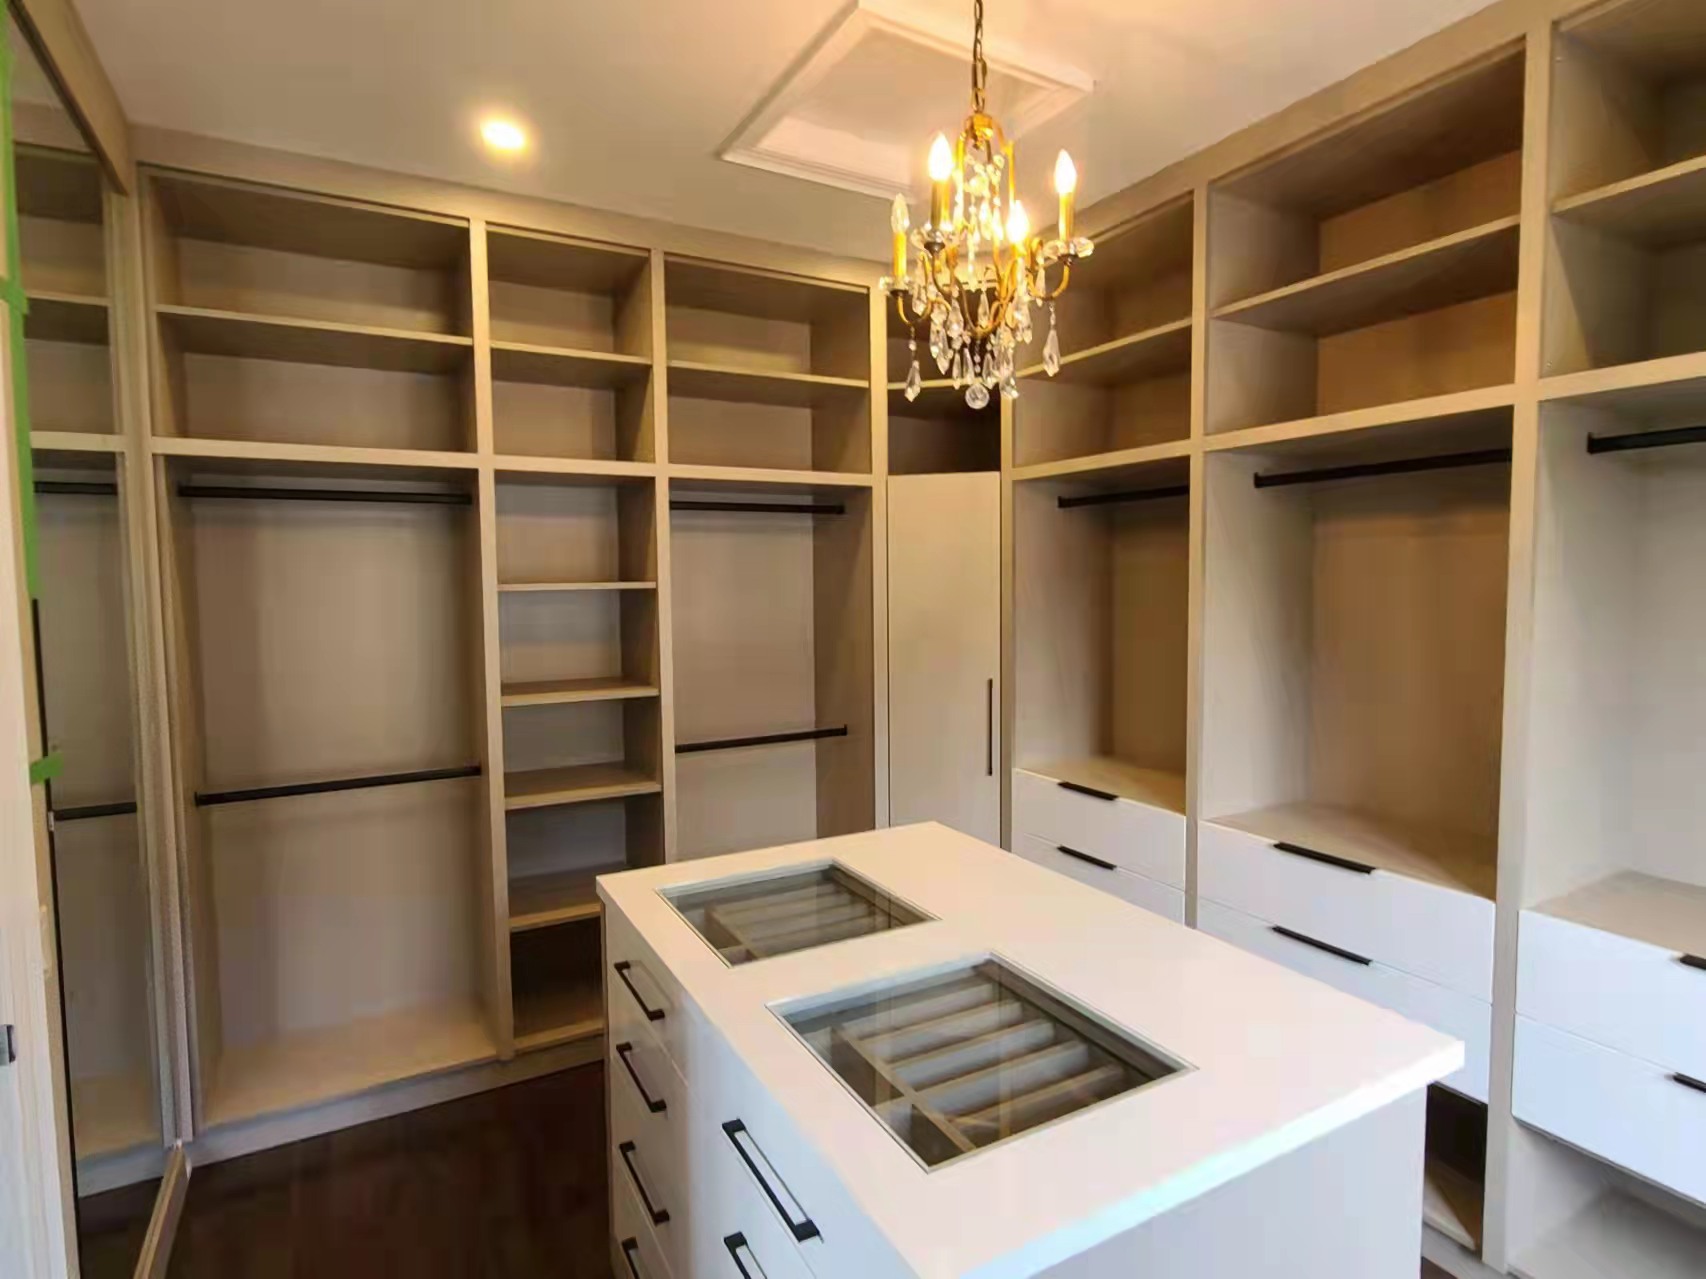 Modern closets made by melamine and high gloss white - FengFa™| Kitchen ...